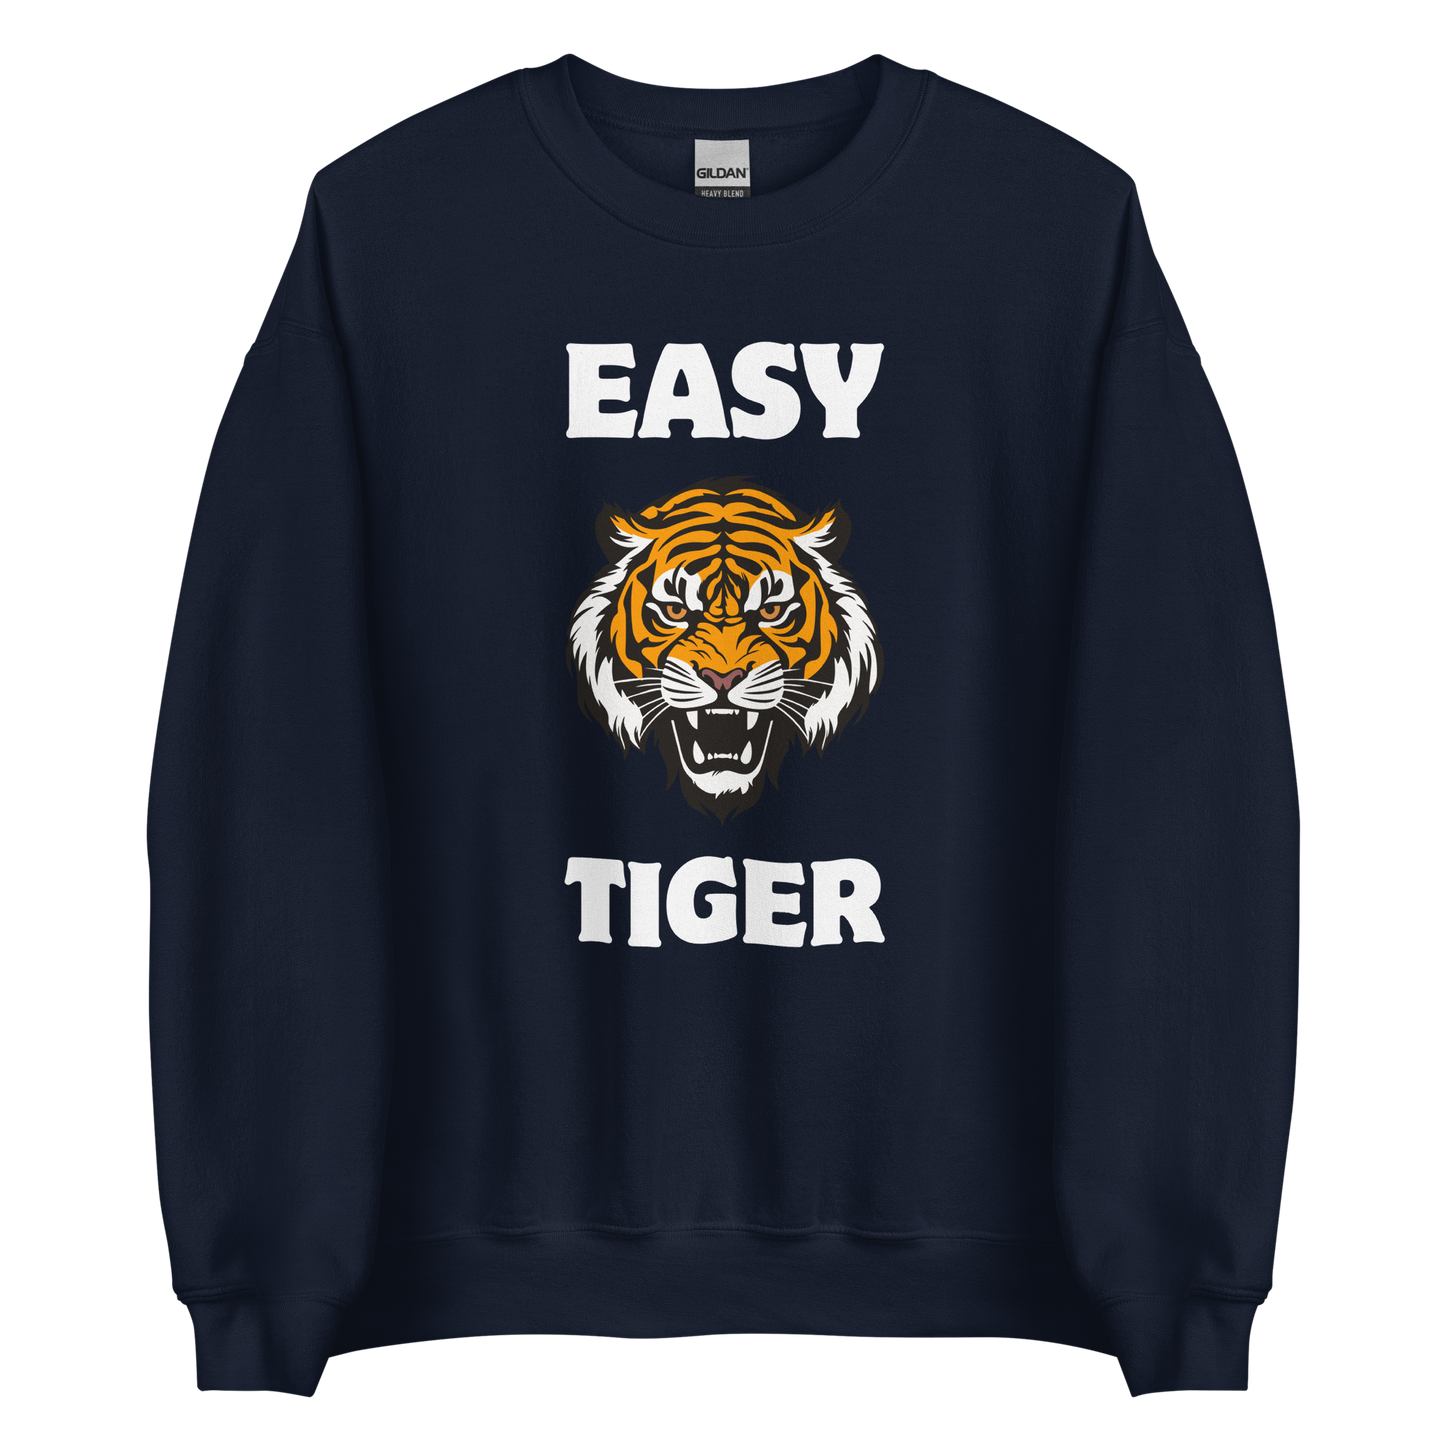 Navy Tiger Sweatshirt featuring a Easy Tiger graphic on the chest - Funny Graphic Tiger Sweatshirts - Boozy Fox